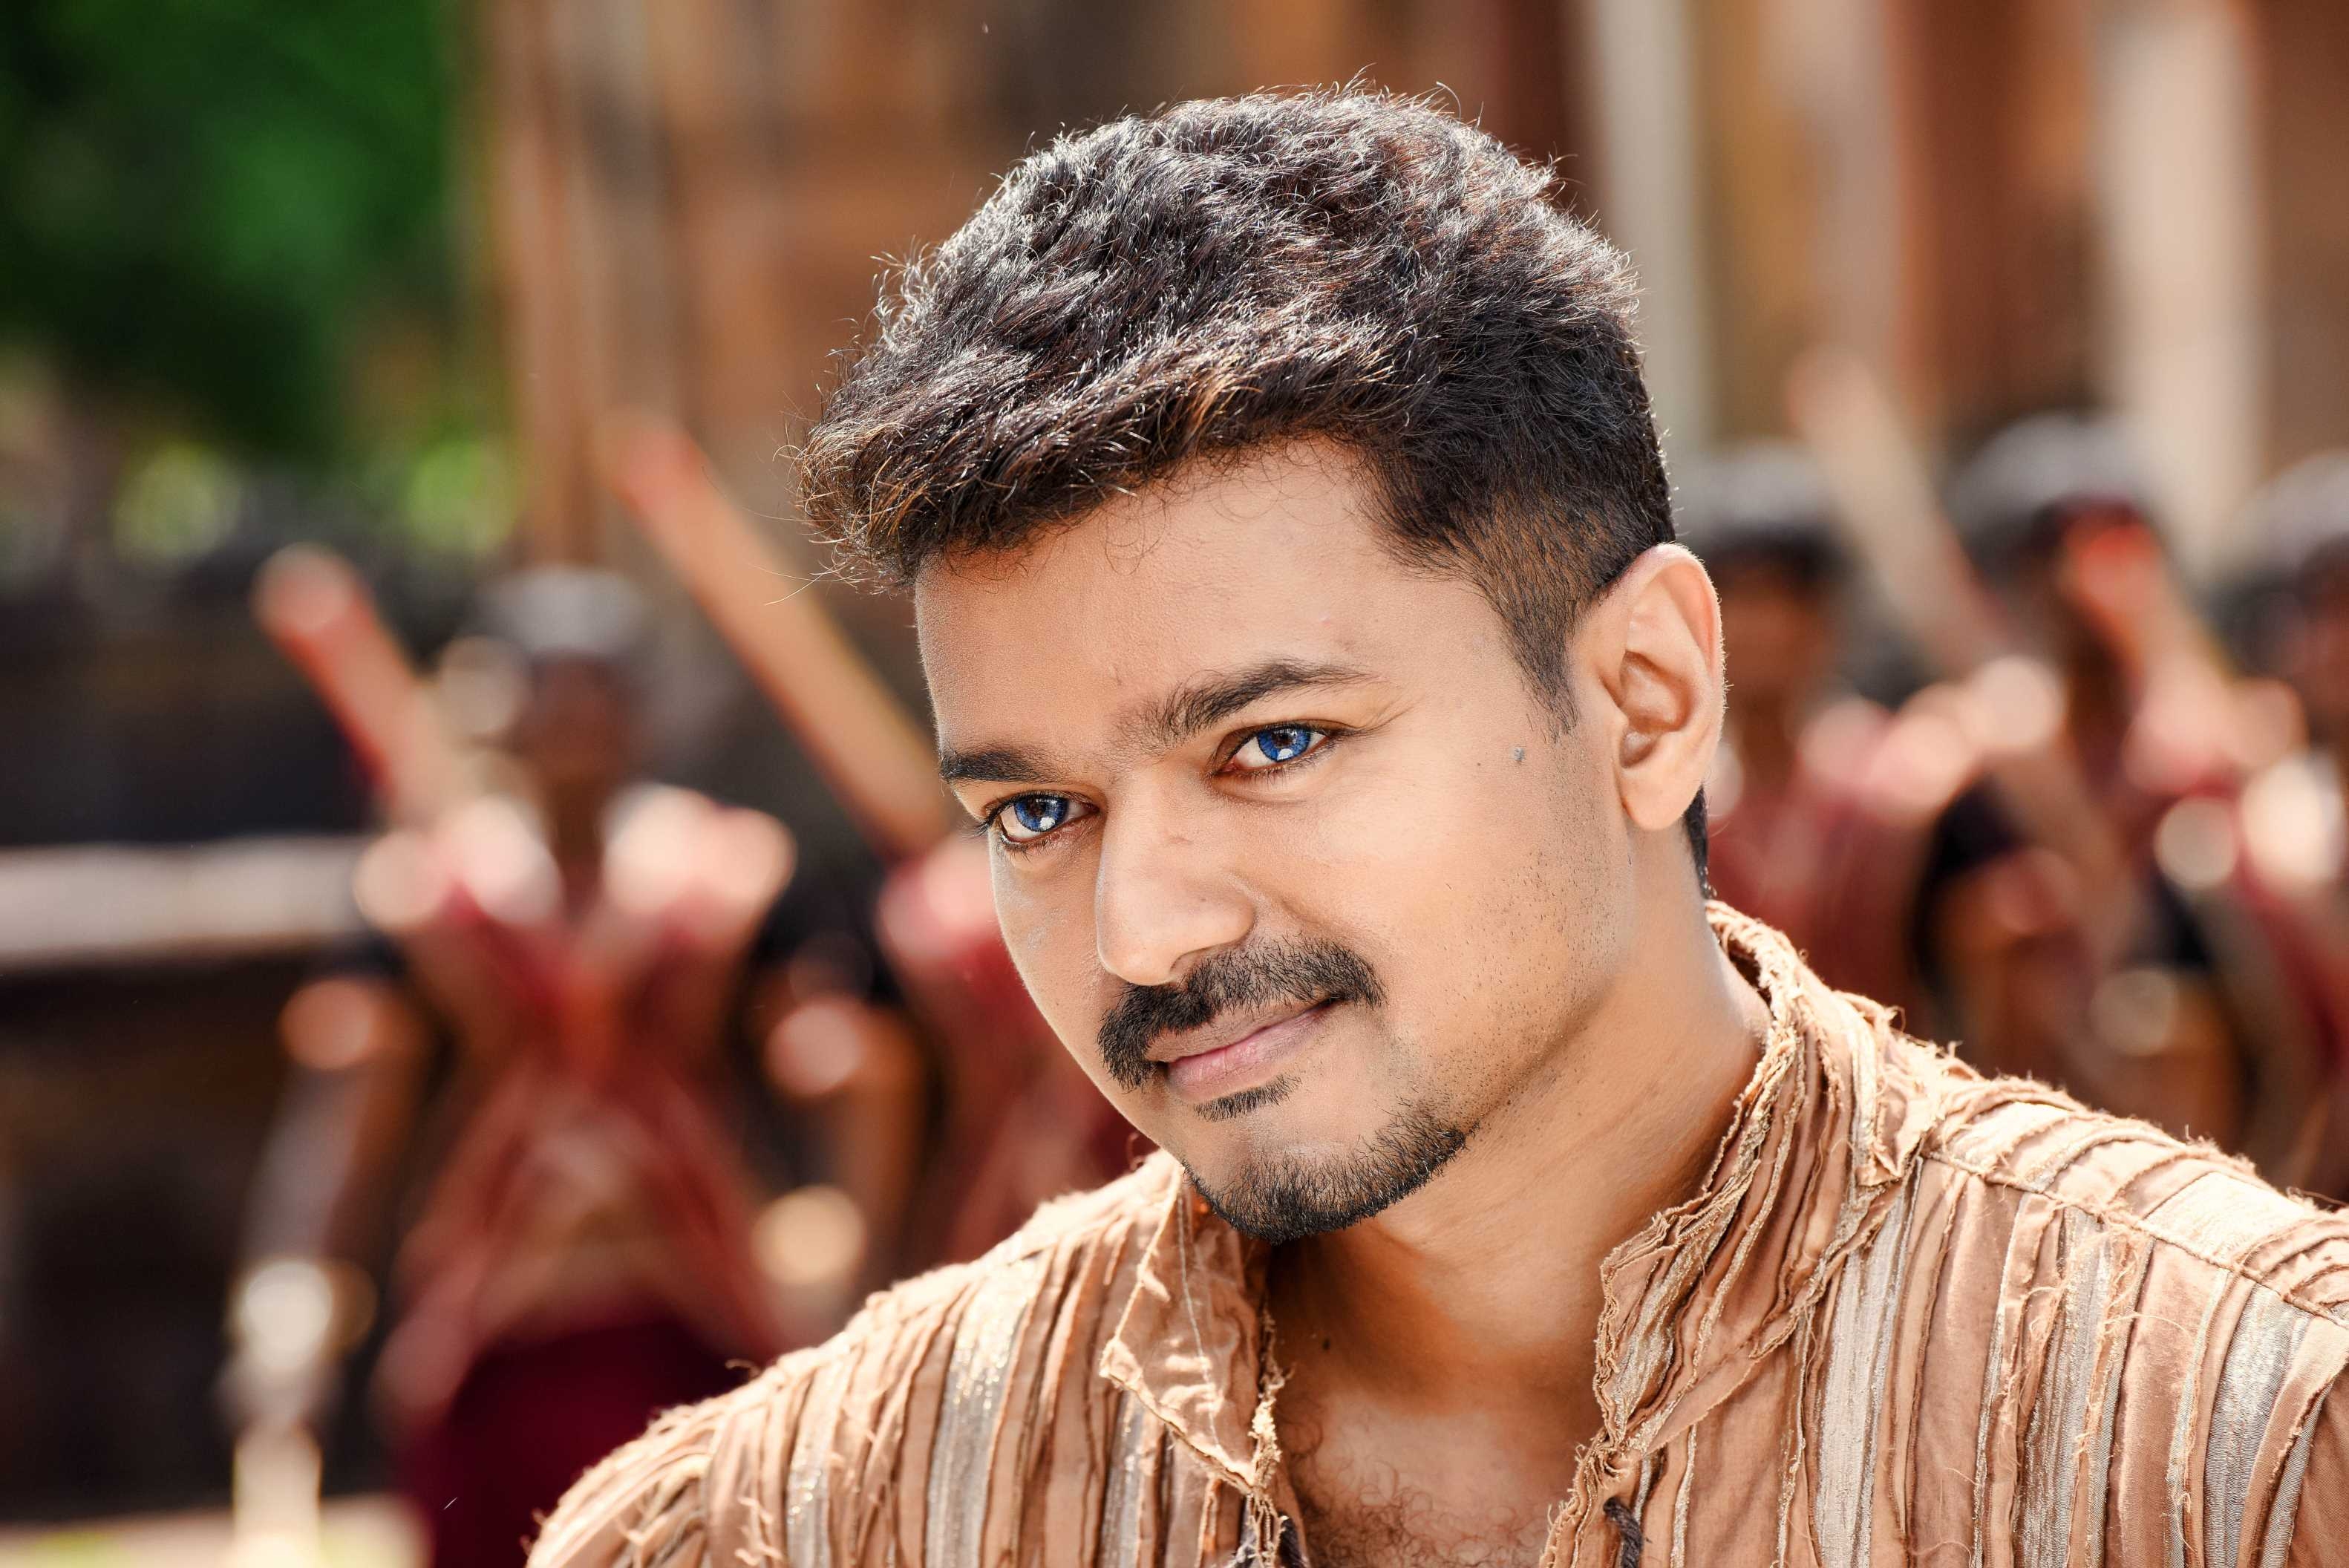 Thalapathy Vijay Desktop Wallpapers Wallpaper Cave Free computers and laptop high definition quality wallpapers for desktop and mobiles in hd, wide, 4k and 5k resolutions. thalapathy vijay desktop wallpapers